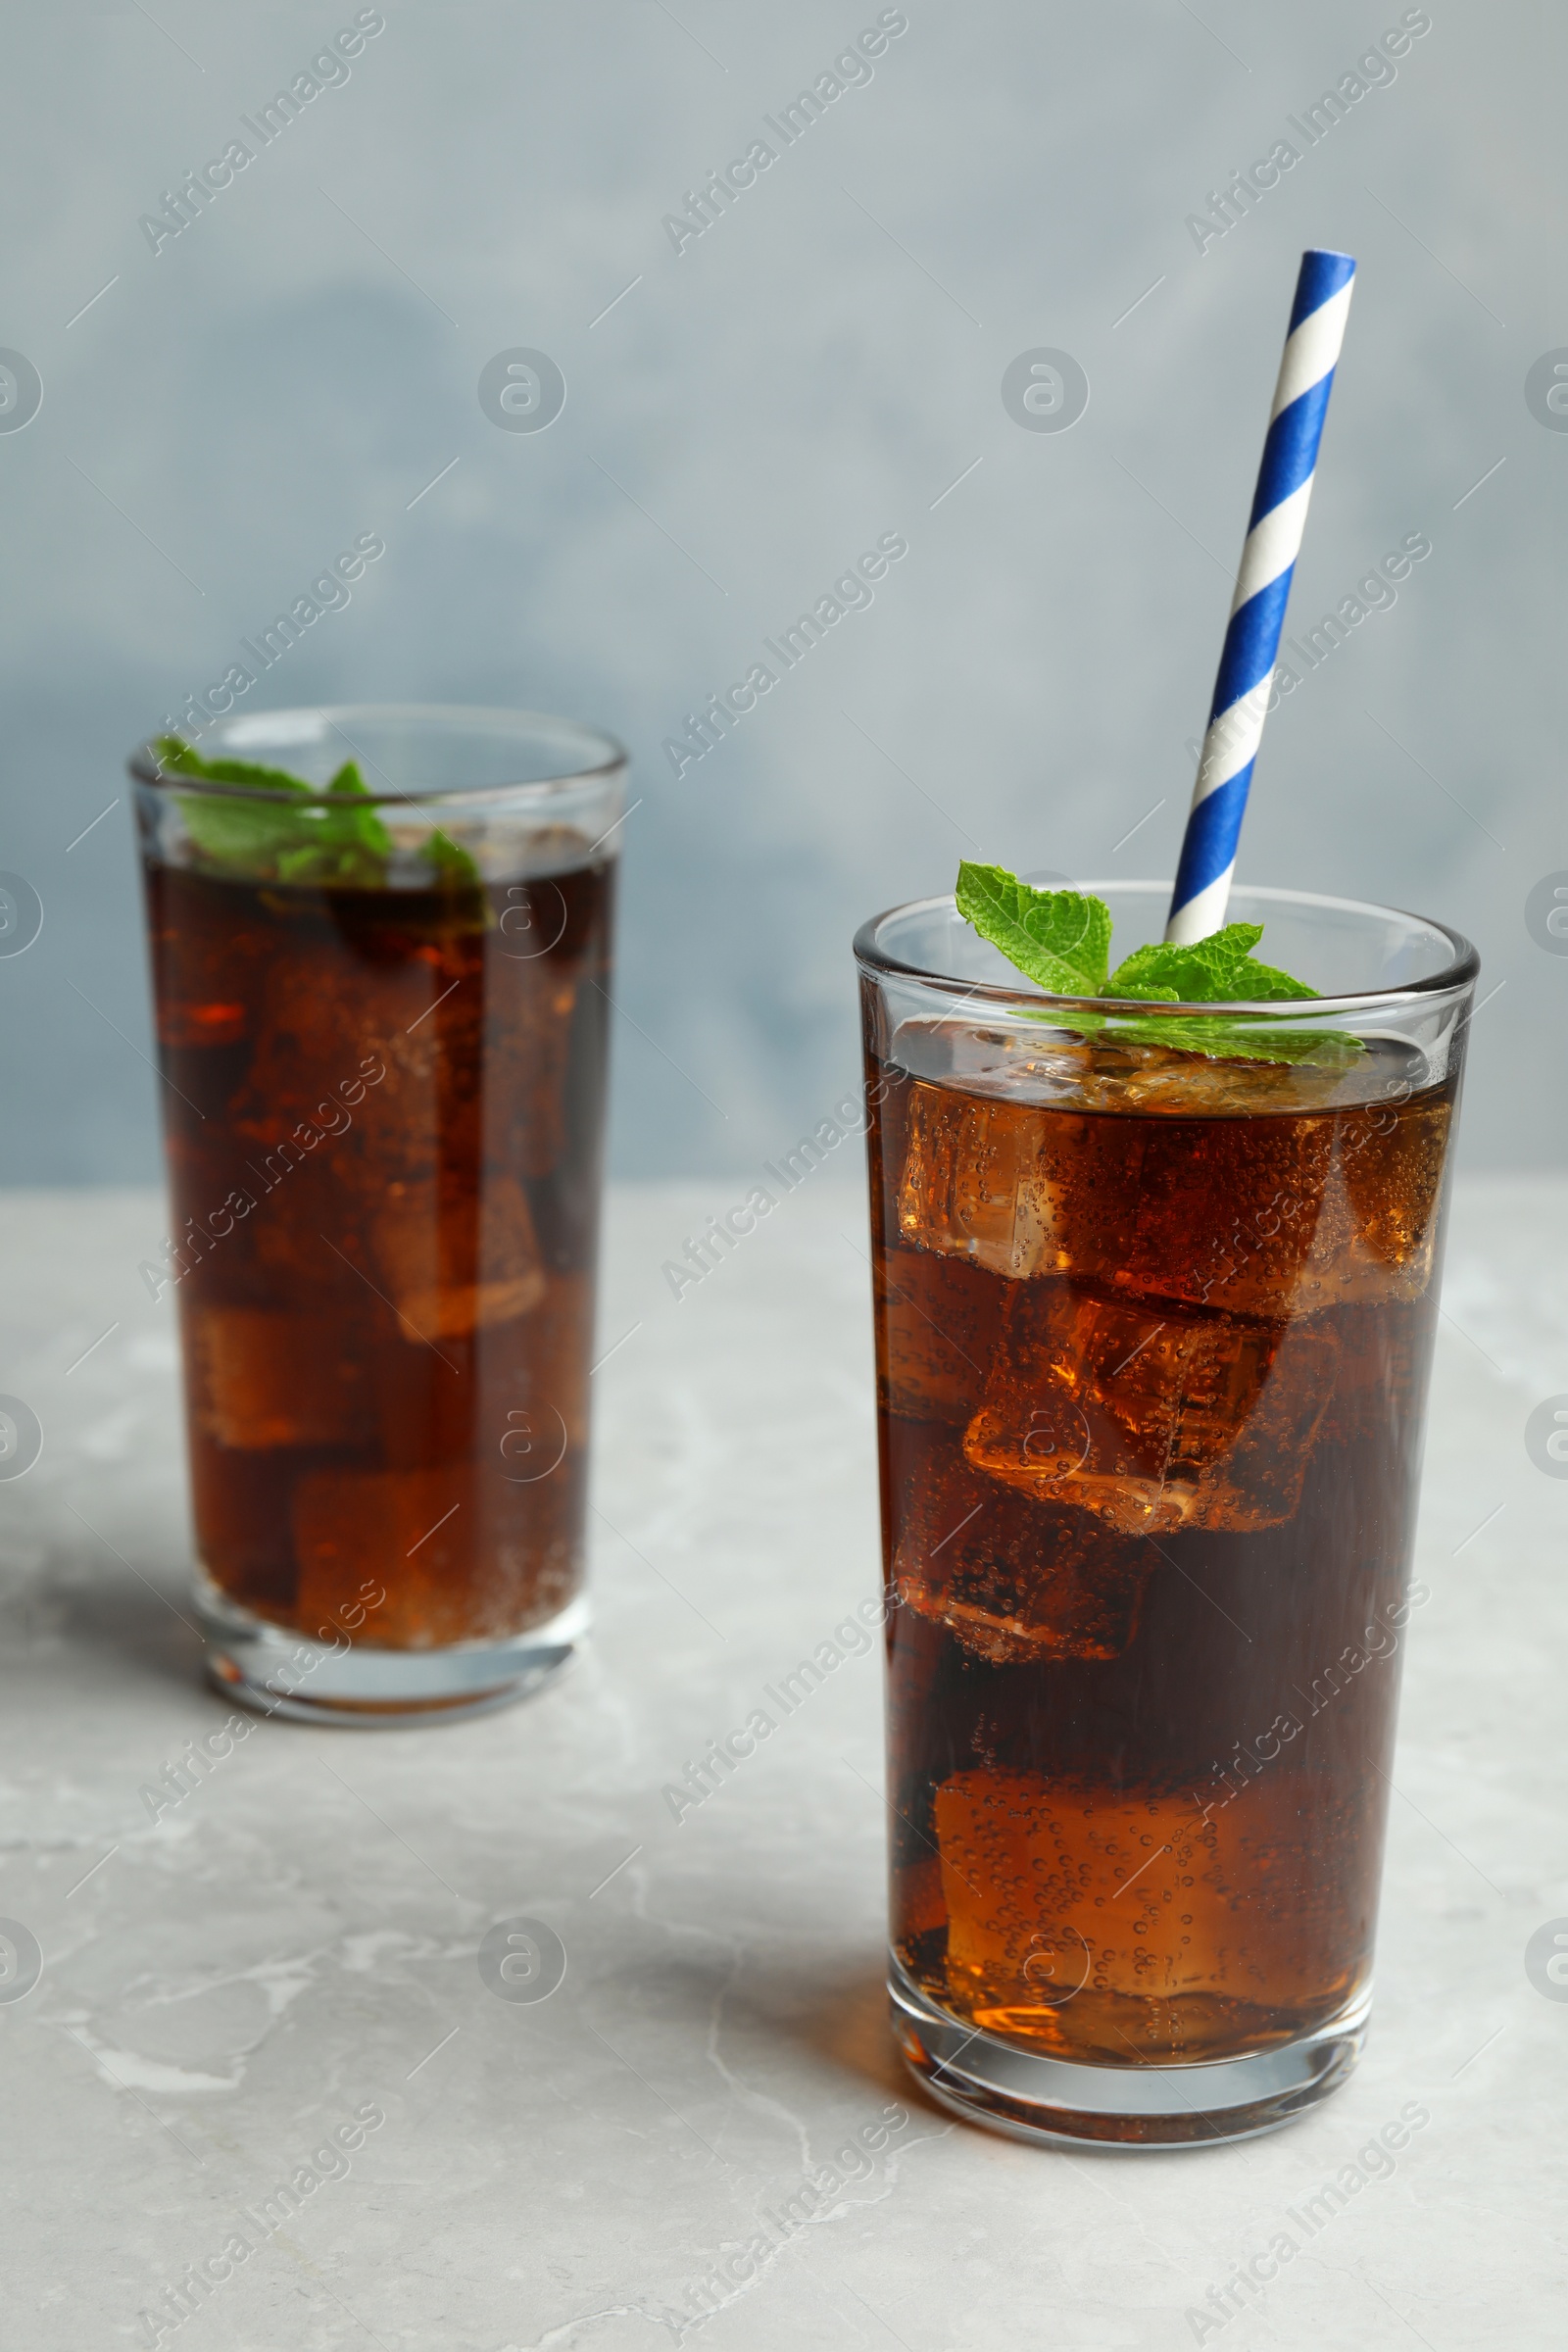 Photo of Refreshing soda drinks with straw on grey table against blue background